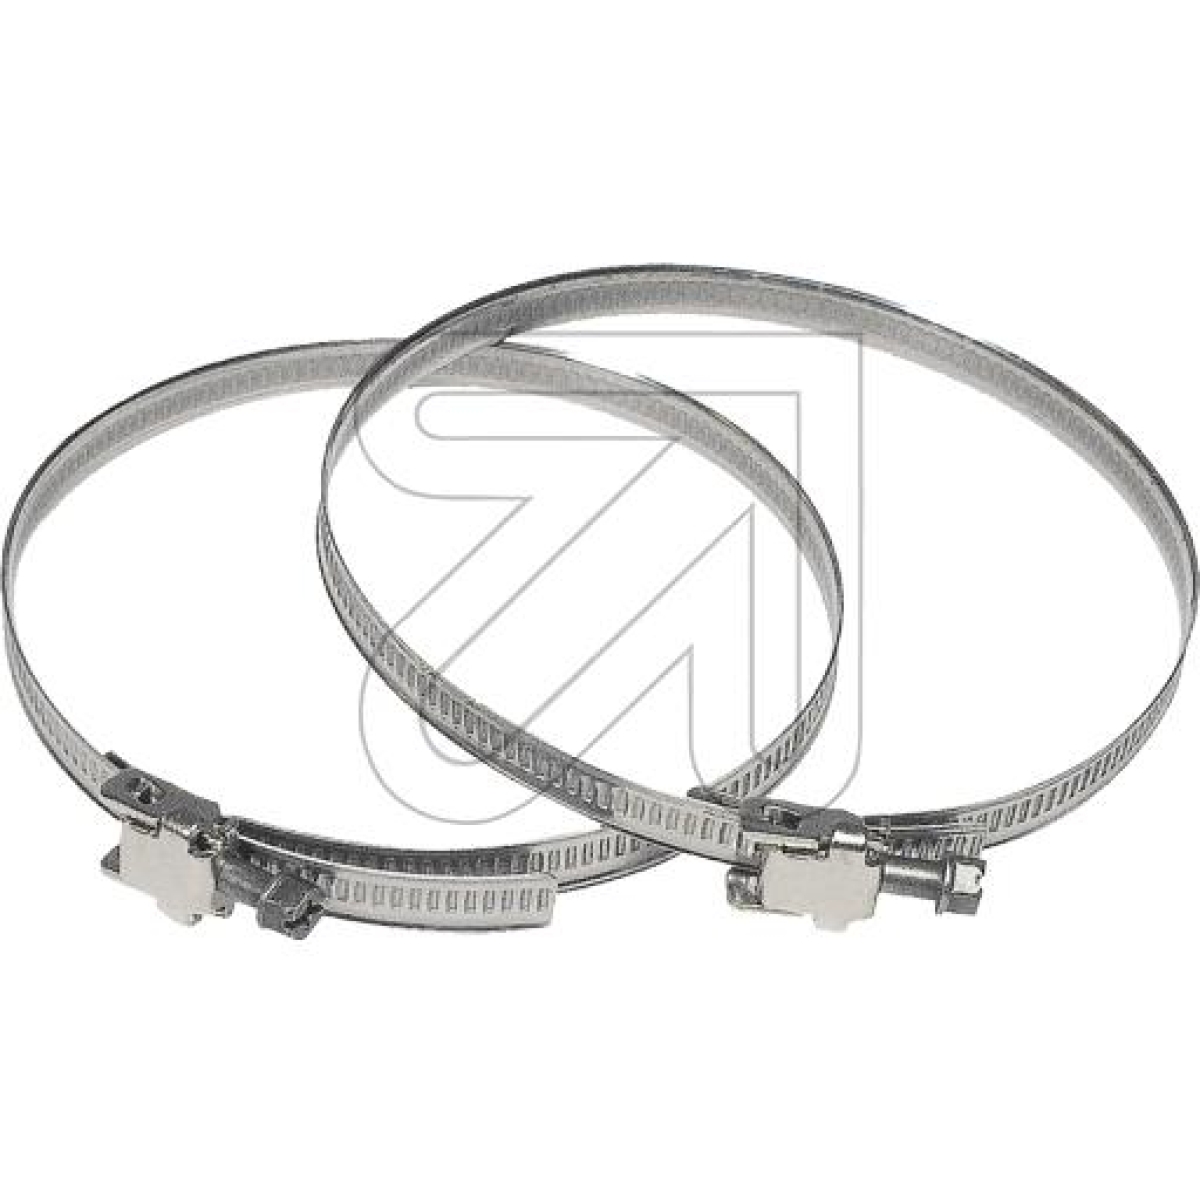 EGBQuick release hose clamp 60-110mmArticle-No: 442305